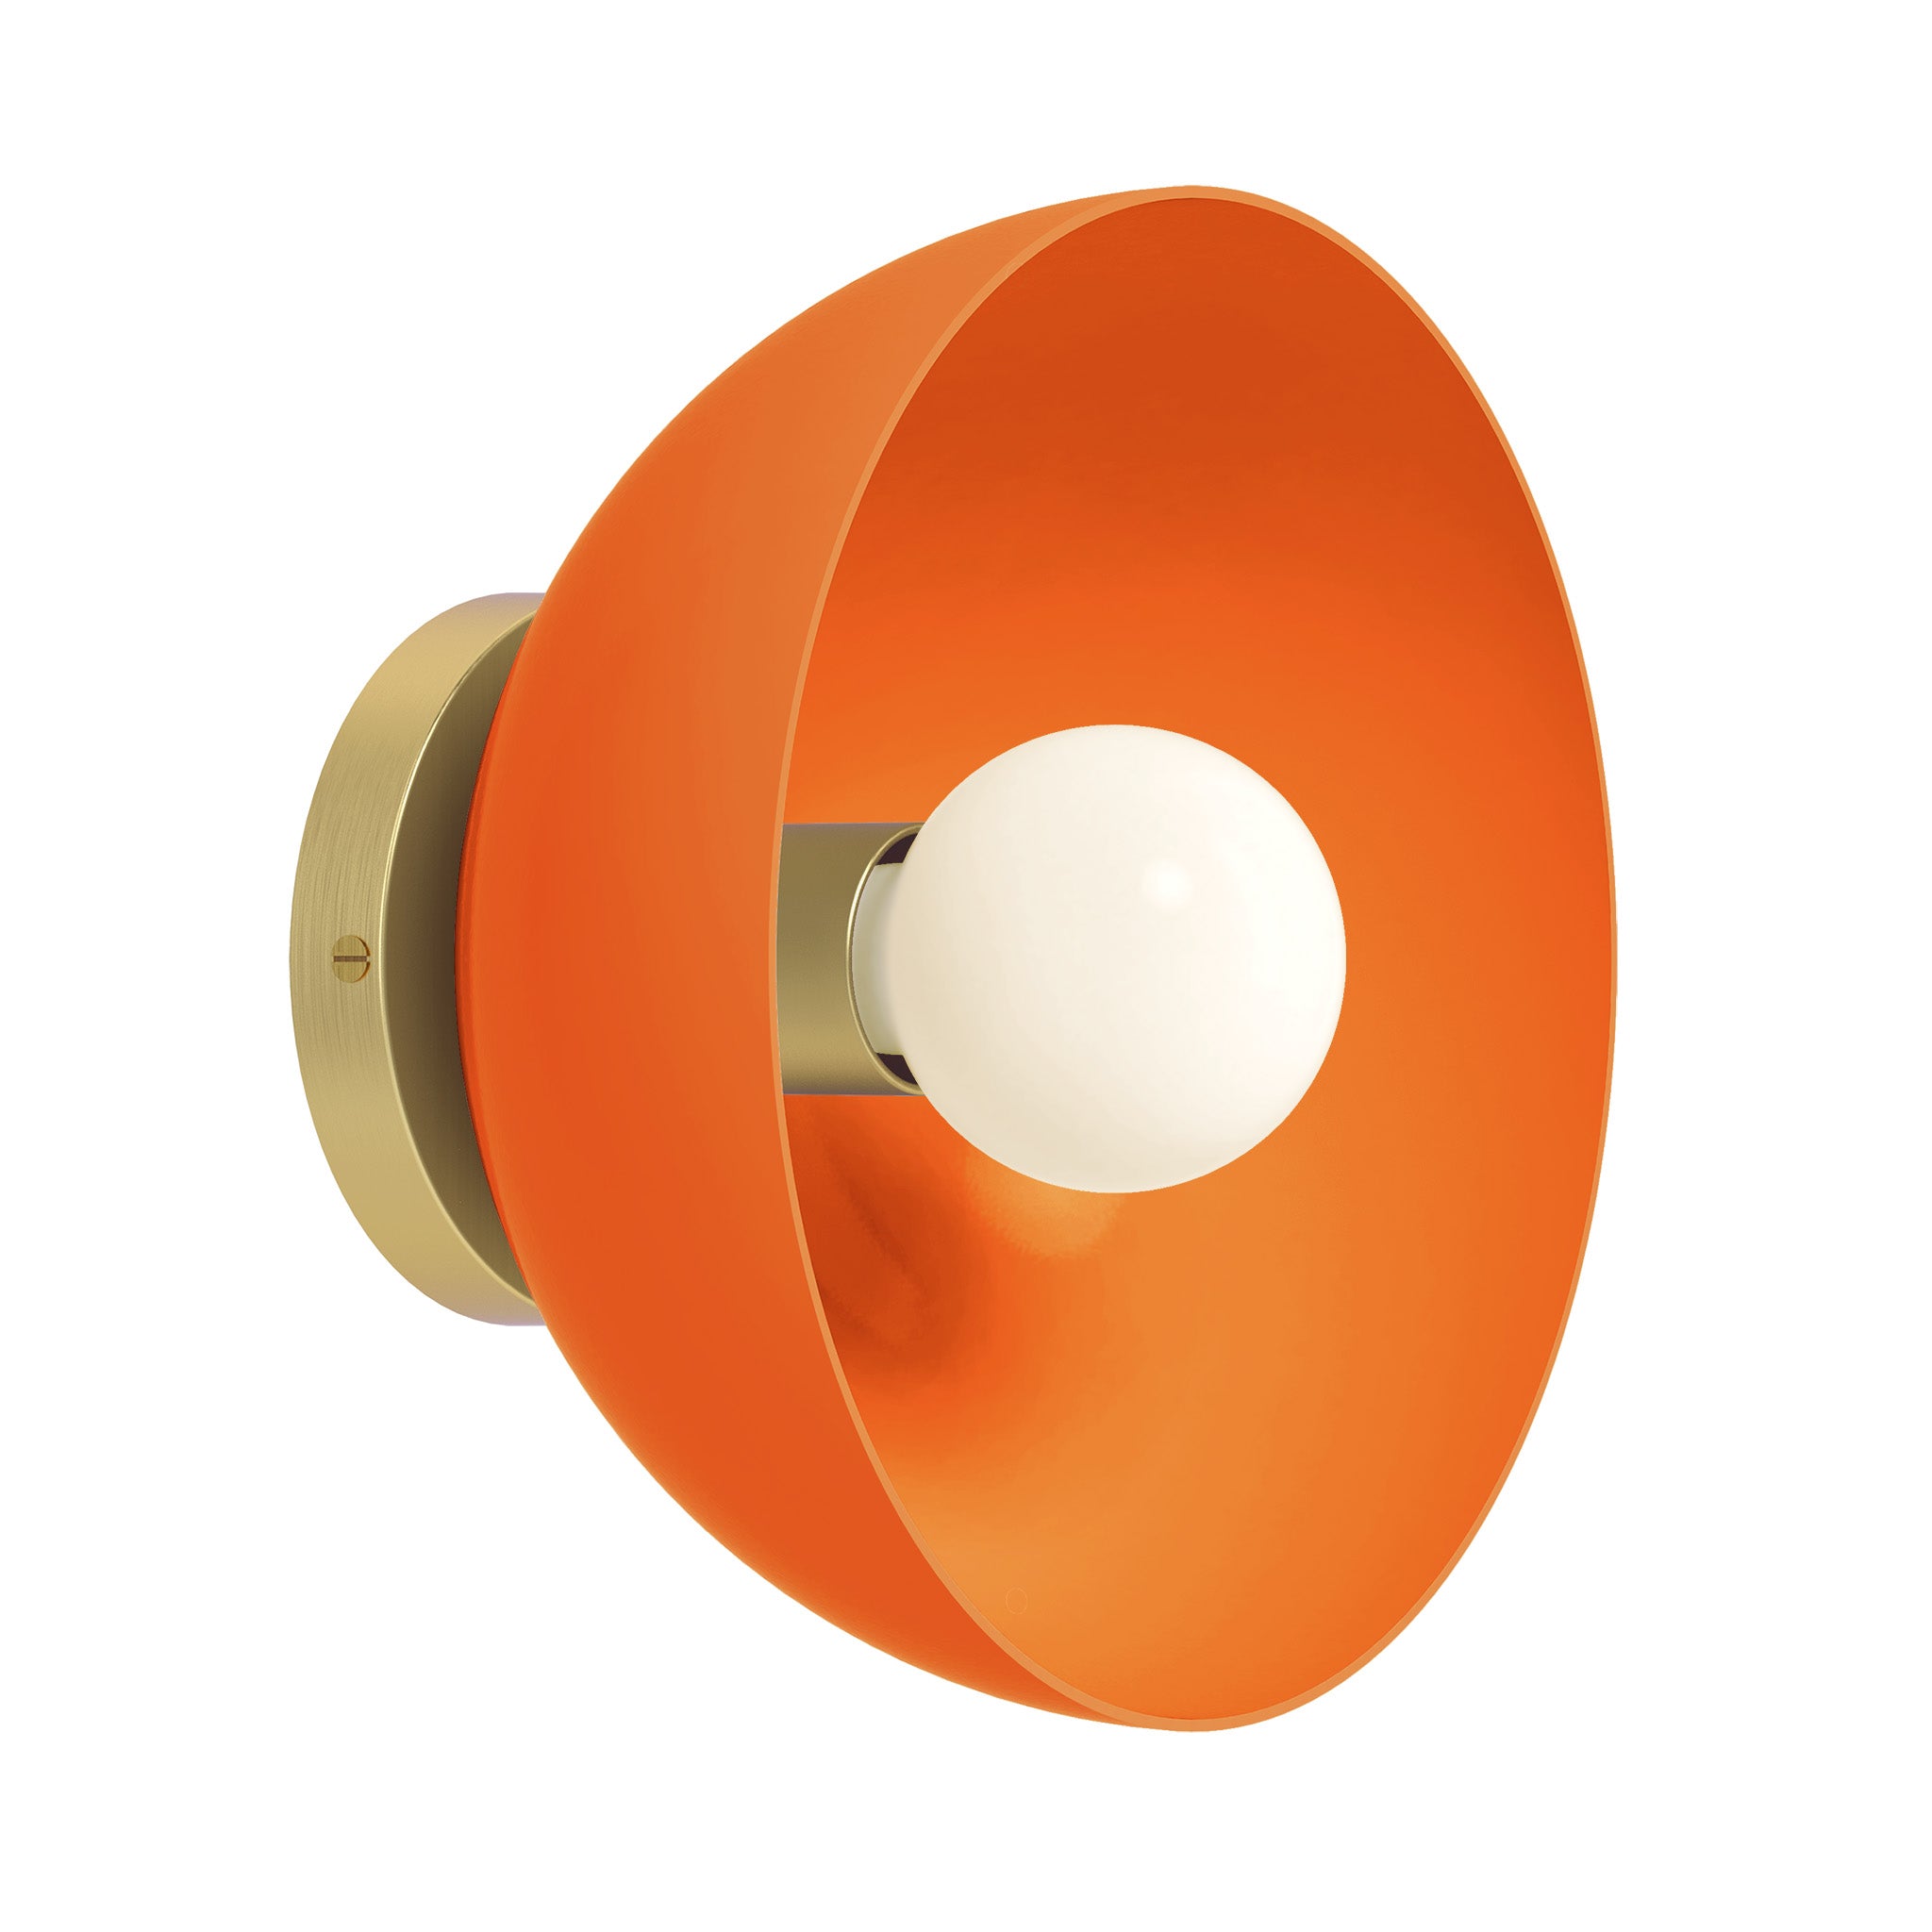 Brass and orange color hemi dome sconce 10" Dutton Brown lighting